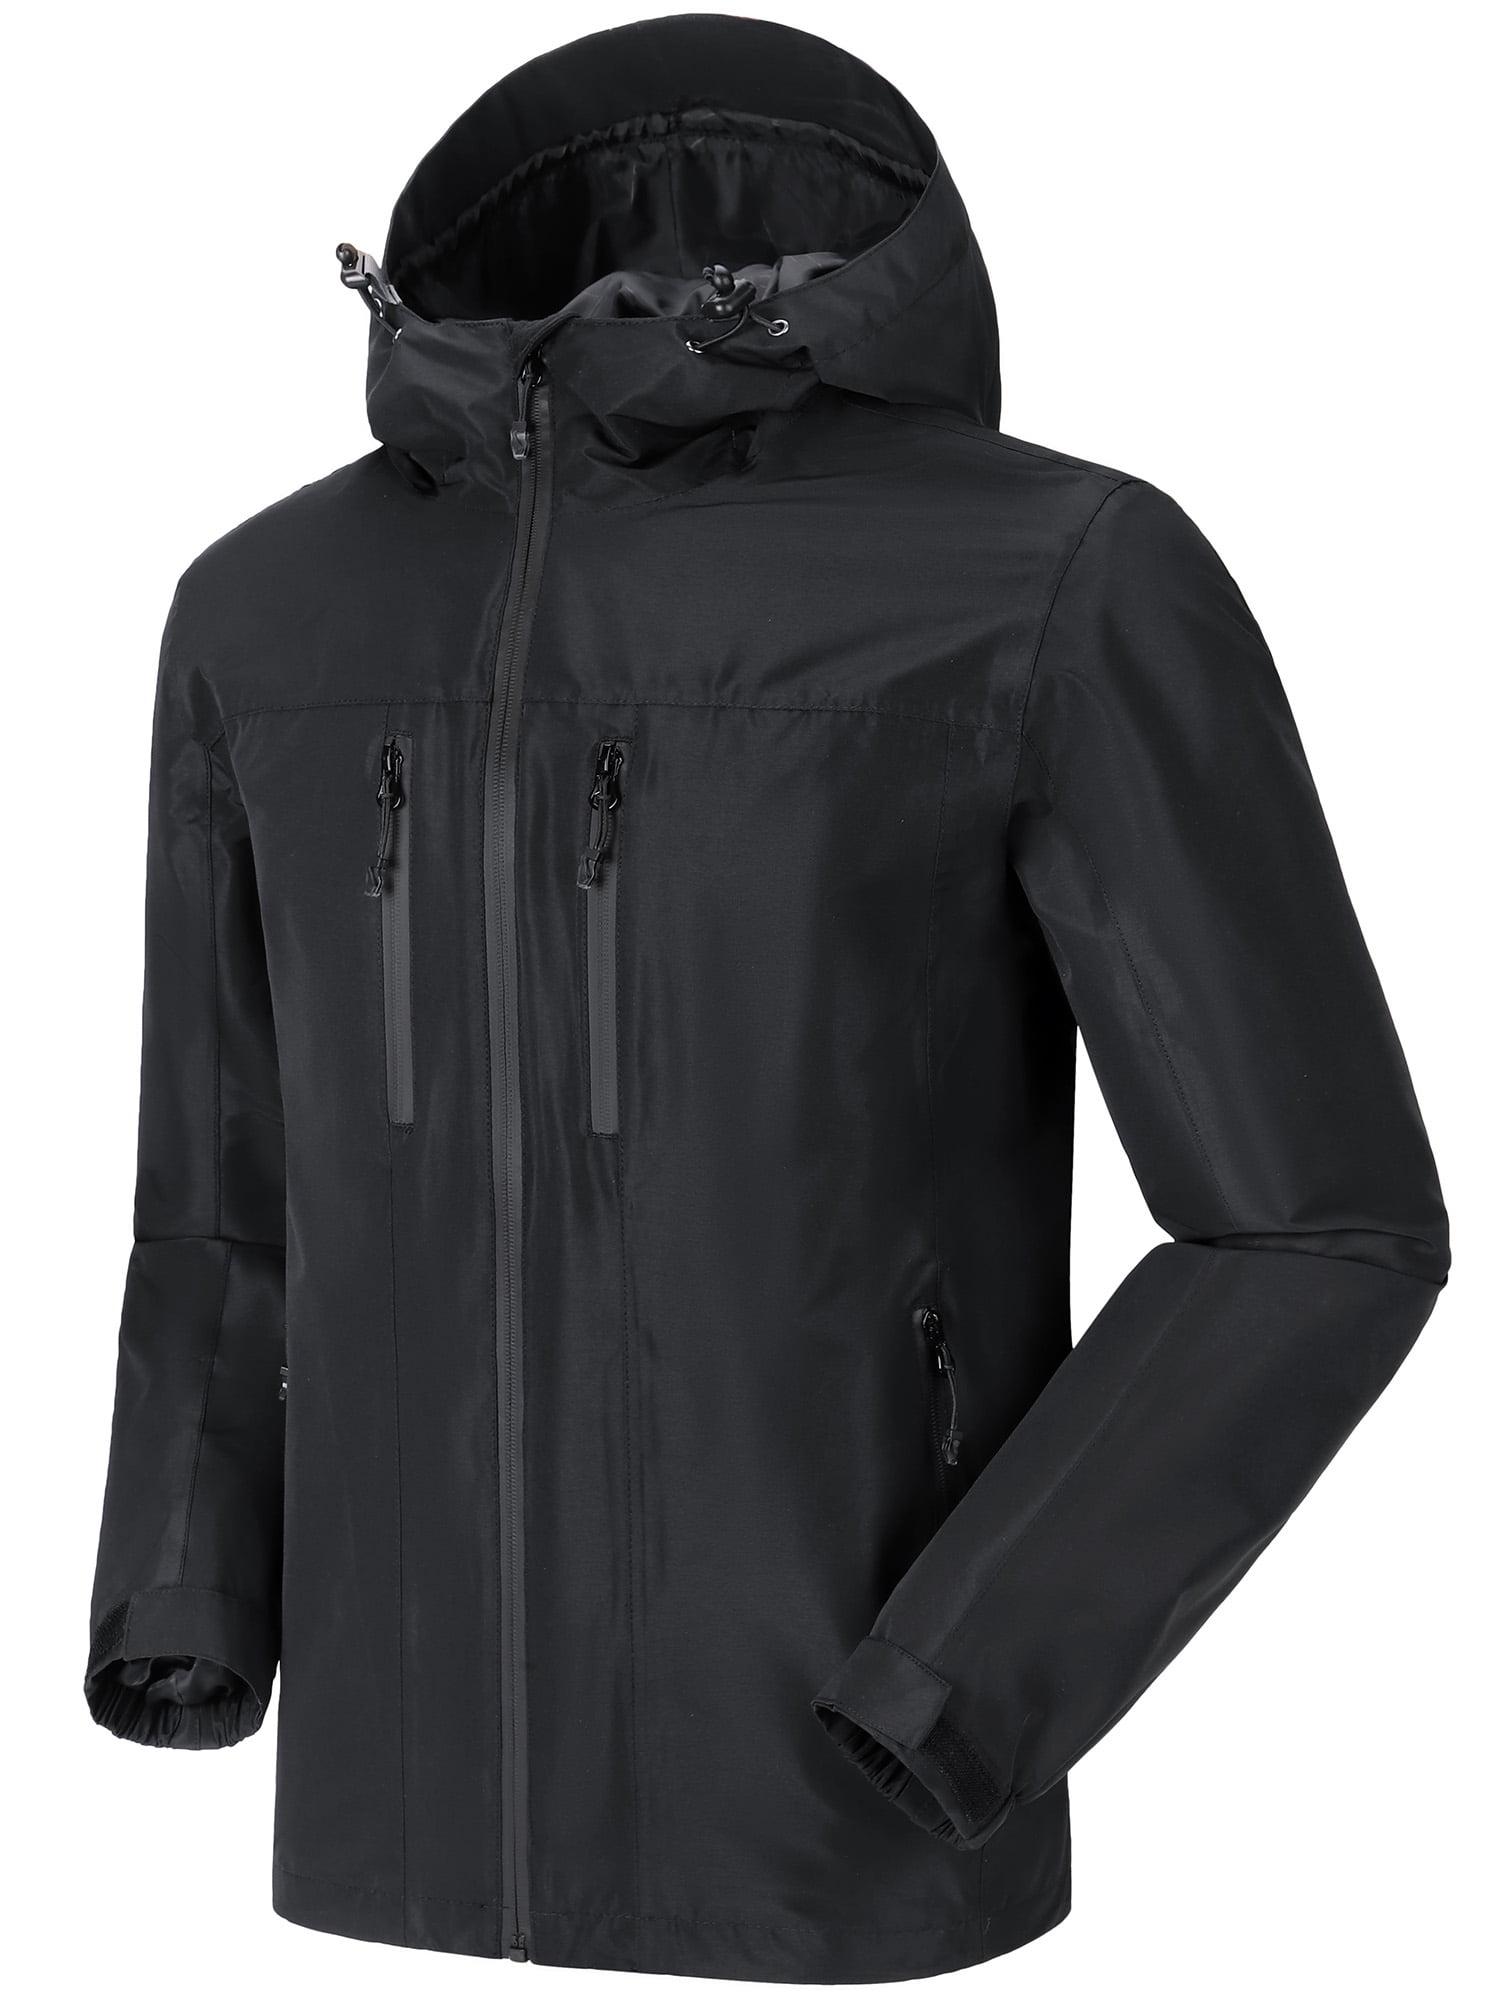 Gillz Waterman Lightweight Packable Waterproof Jackets for Men with Sealed  Seams and Packable Design